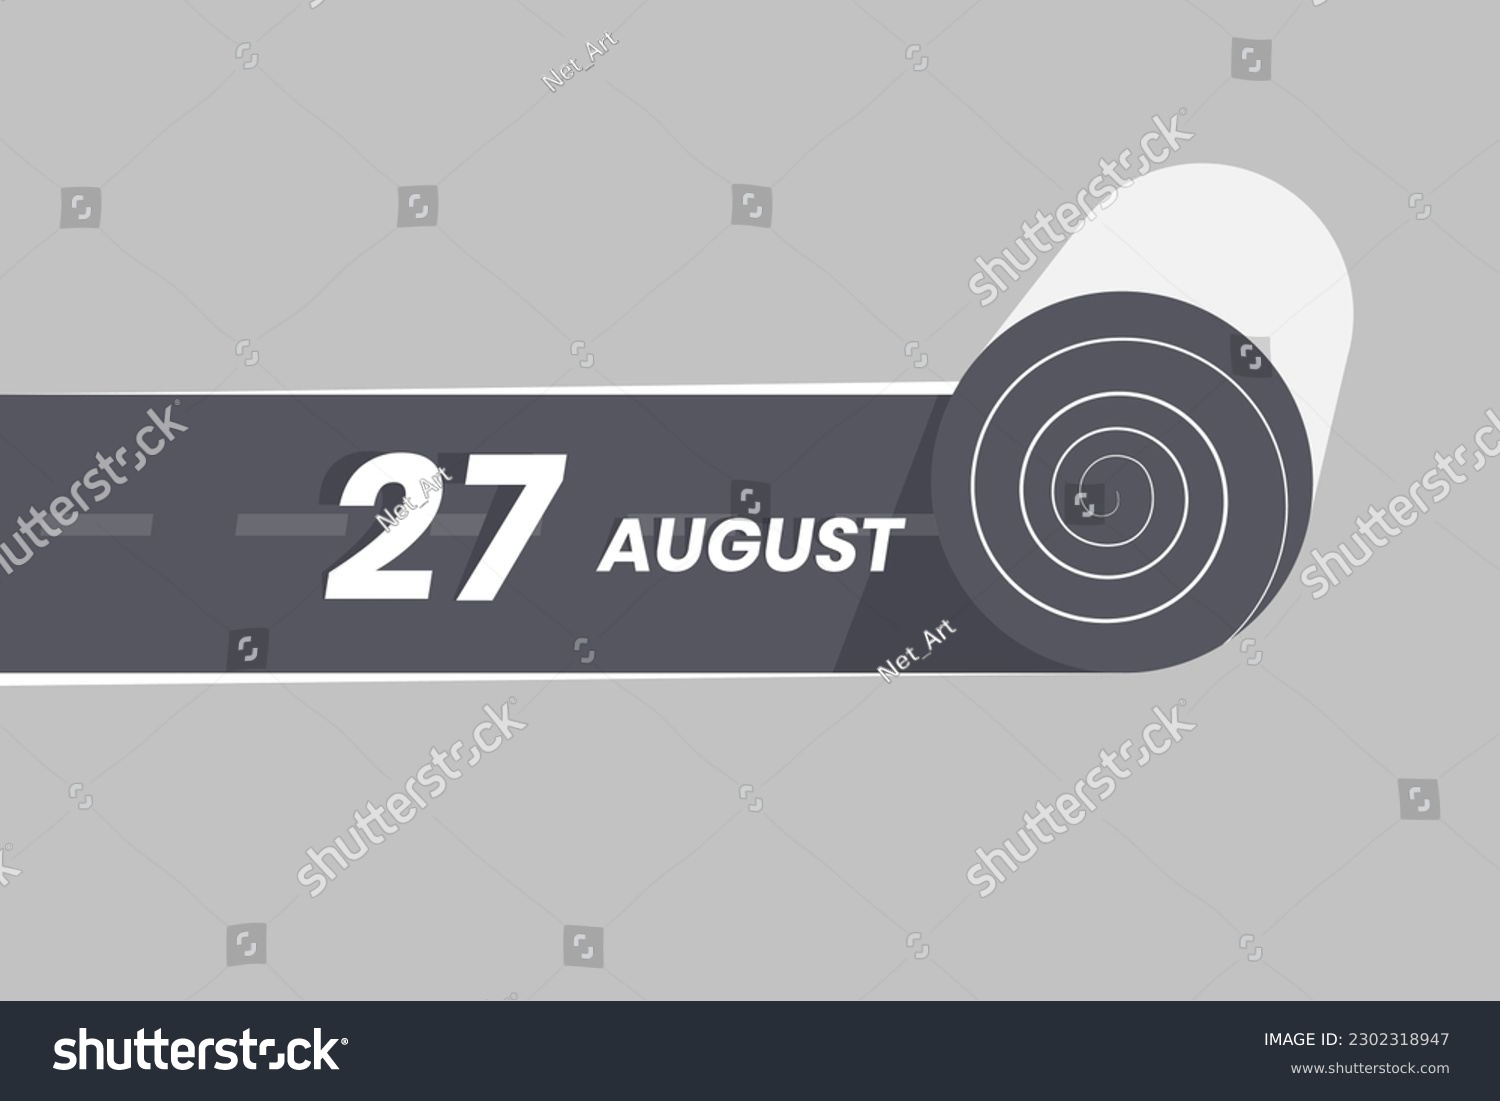 SVG of August 27 calendar icon rolling inside the road. 27 August Date Month icon vector illustrator. svg